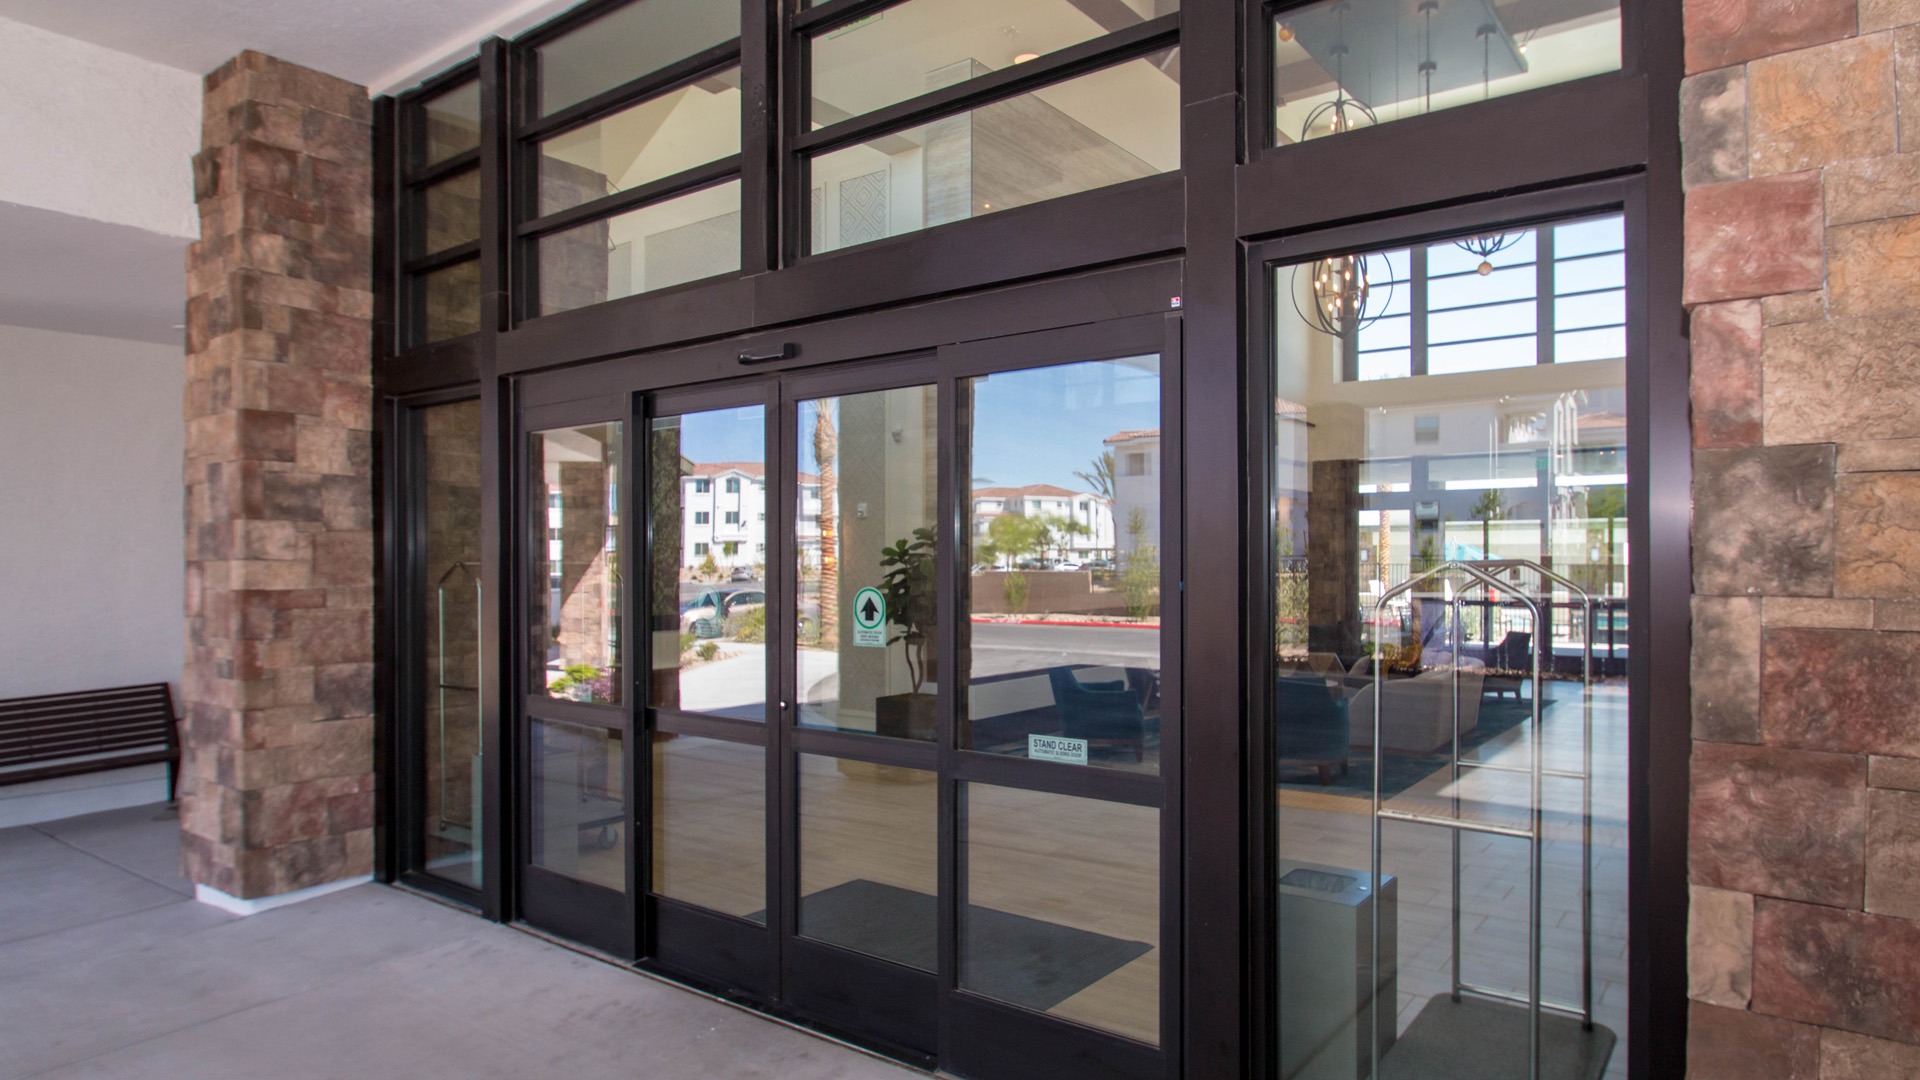 Automatic Doors Installation Las Vegas, Commercial Automatic Sliding Glass Doors Cost